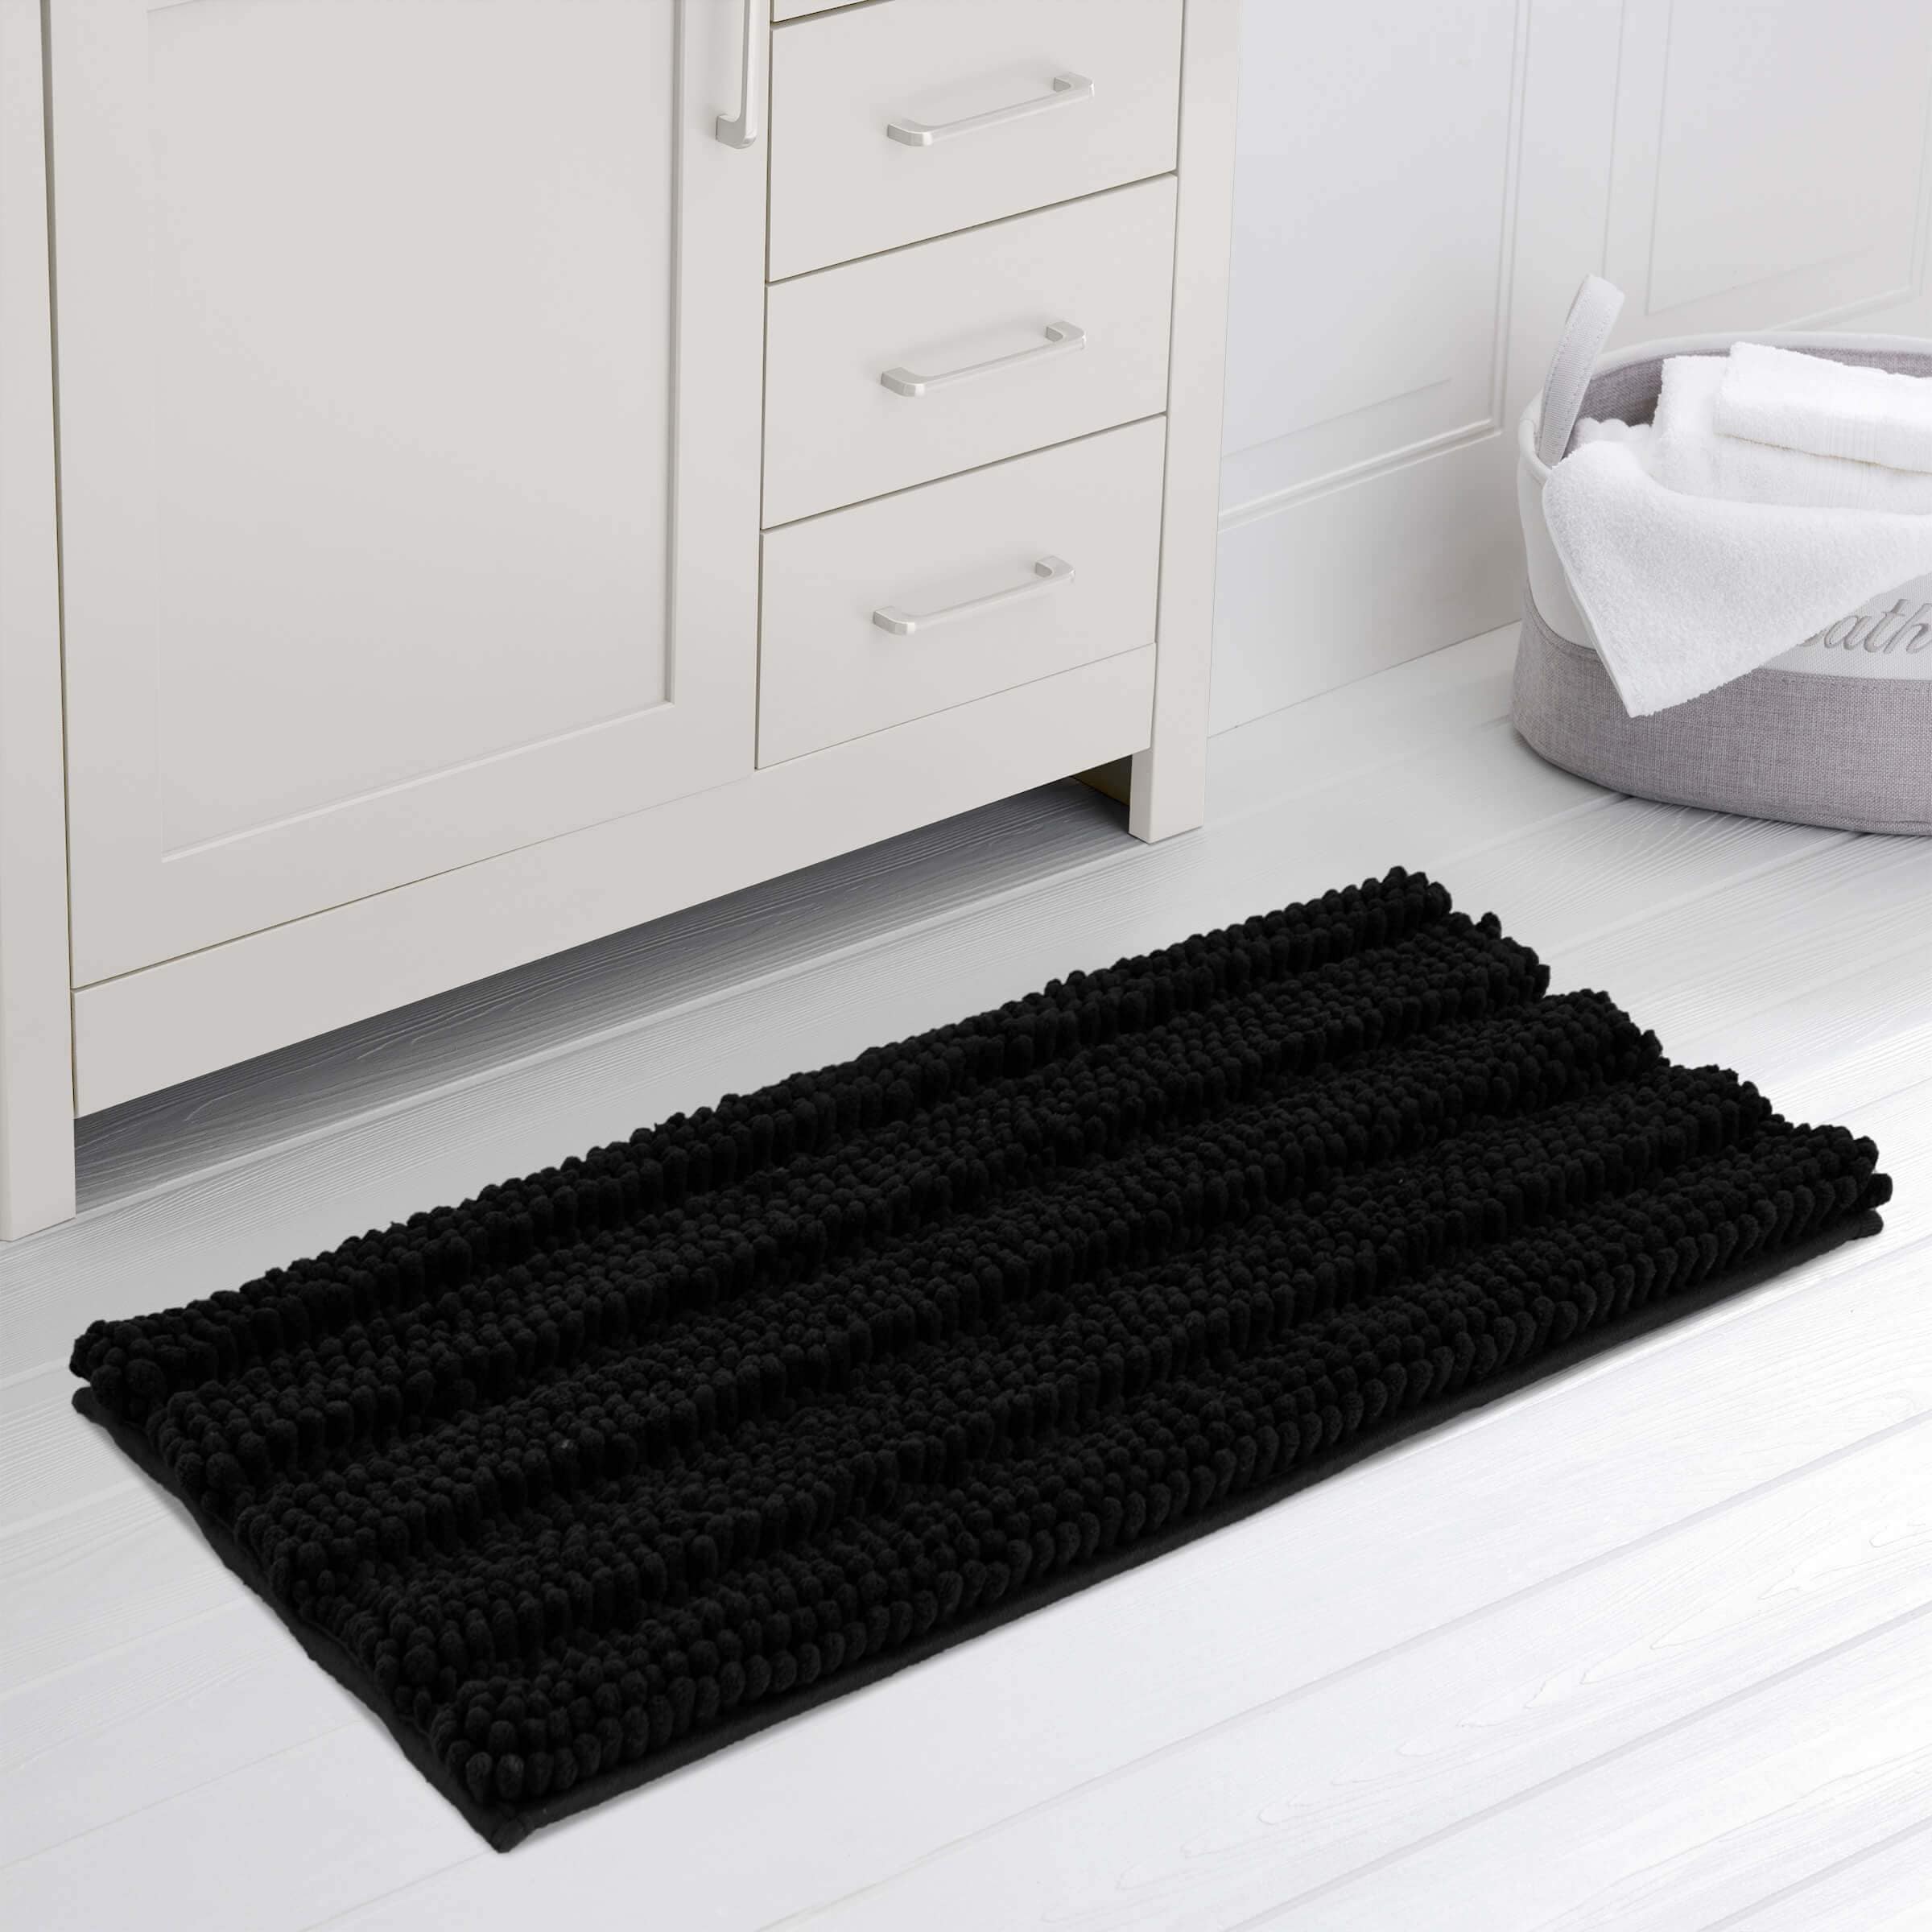 https://ak1.ostkcdn.com/images/products/is/images/direct/966b072a217c15ca56d3c3c73f1c8587a90779ca/Subrtex-Non-slip-Bathroom-Rug-Chenille-Soft-Striped-Plush-Bath-Mat.jpg